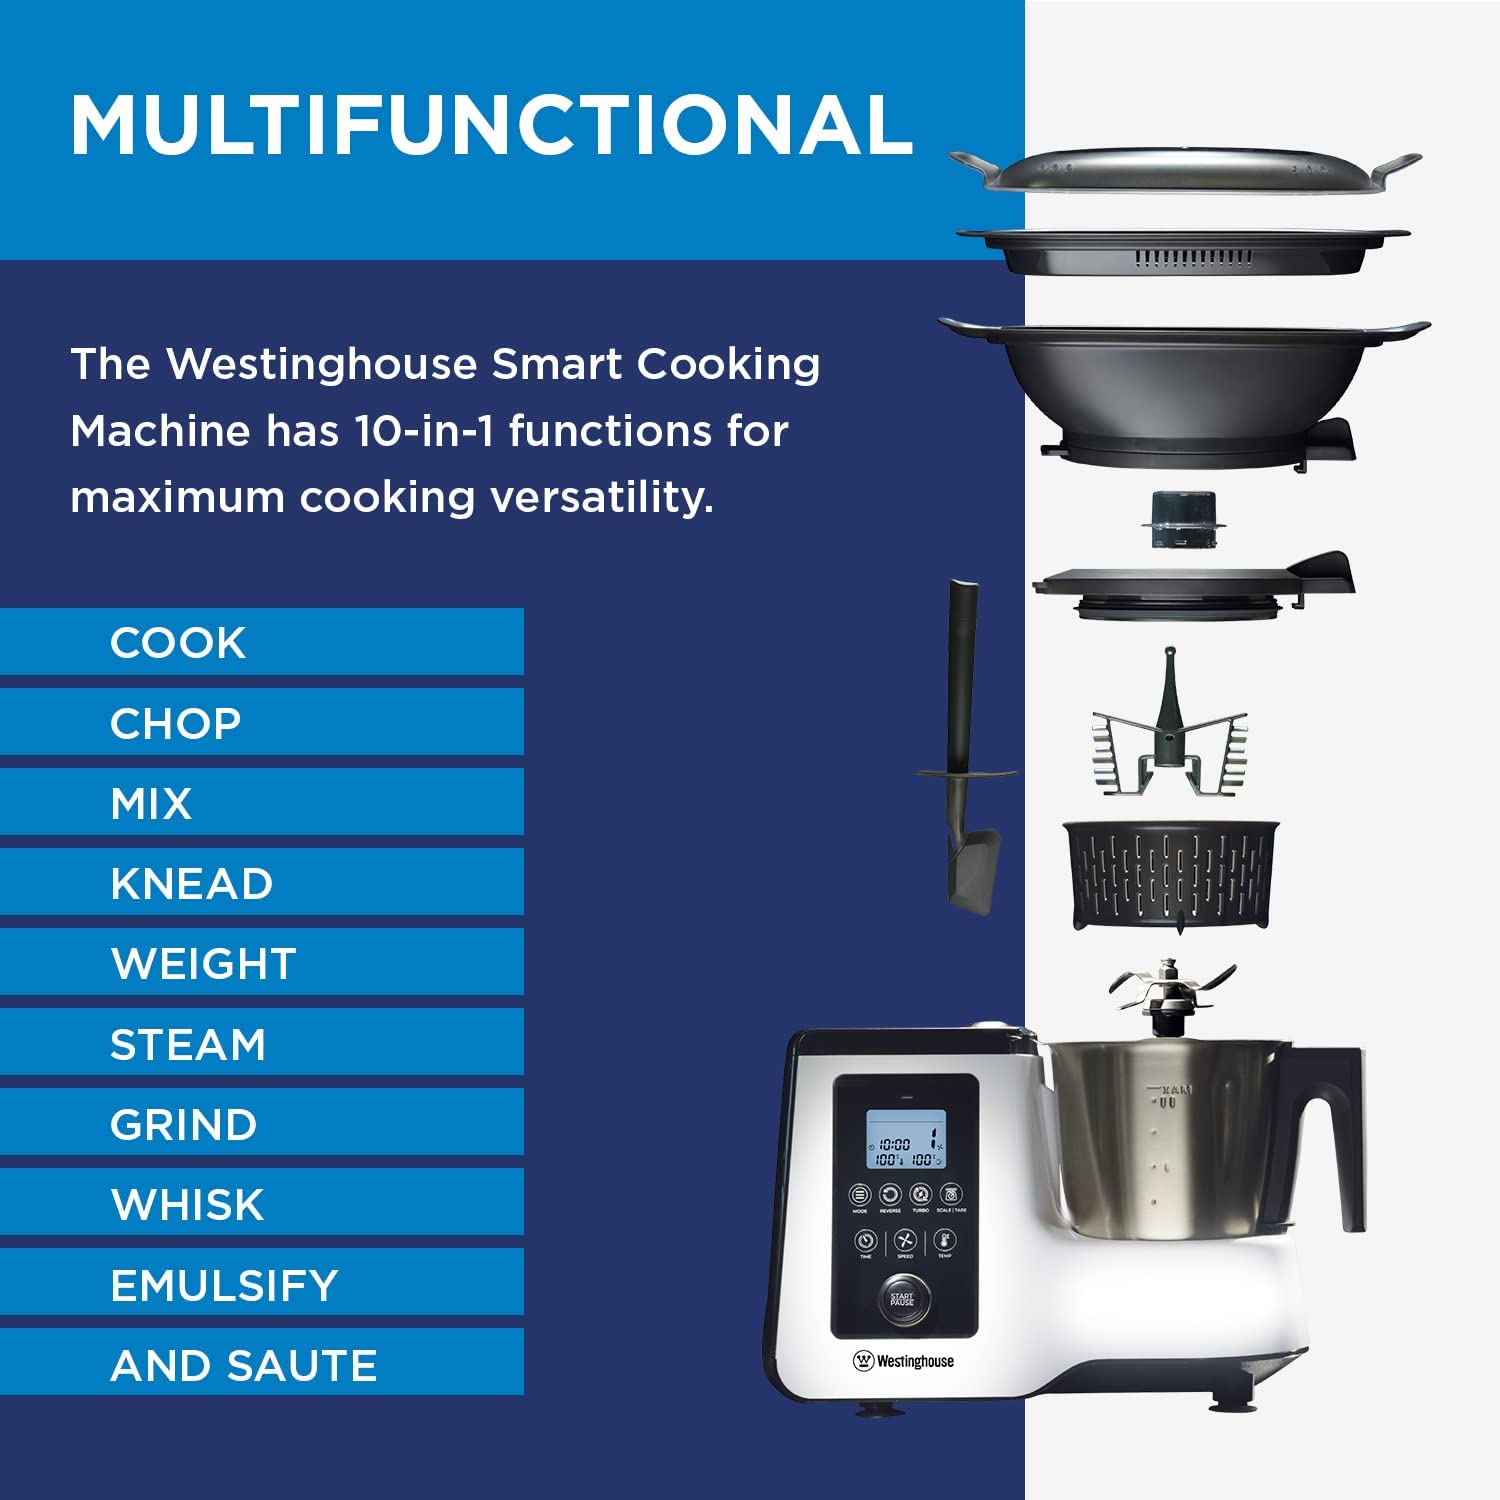 Westinghouse Smart Cooking Machine 10-in-1 Functionality, Featuring  Preset Cooking Modes, LCD Display, Built-In Temperature Controls, and 3L  Removable SS Mixing Bowl